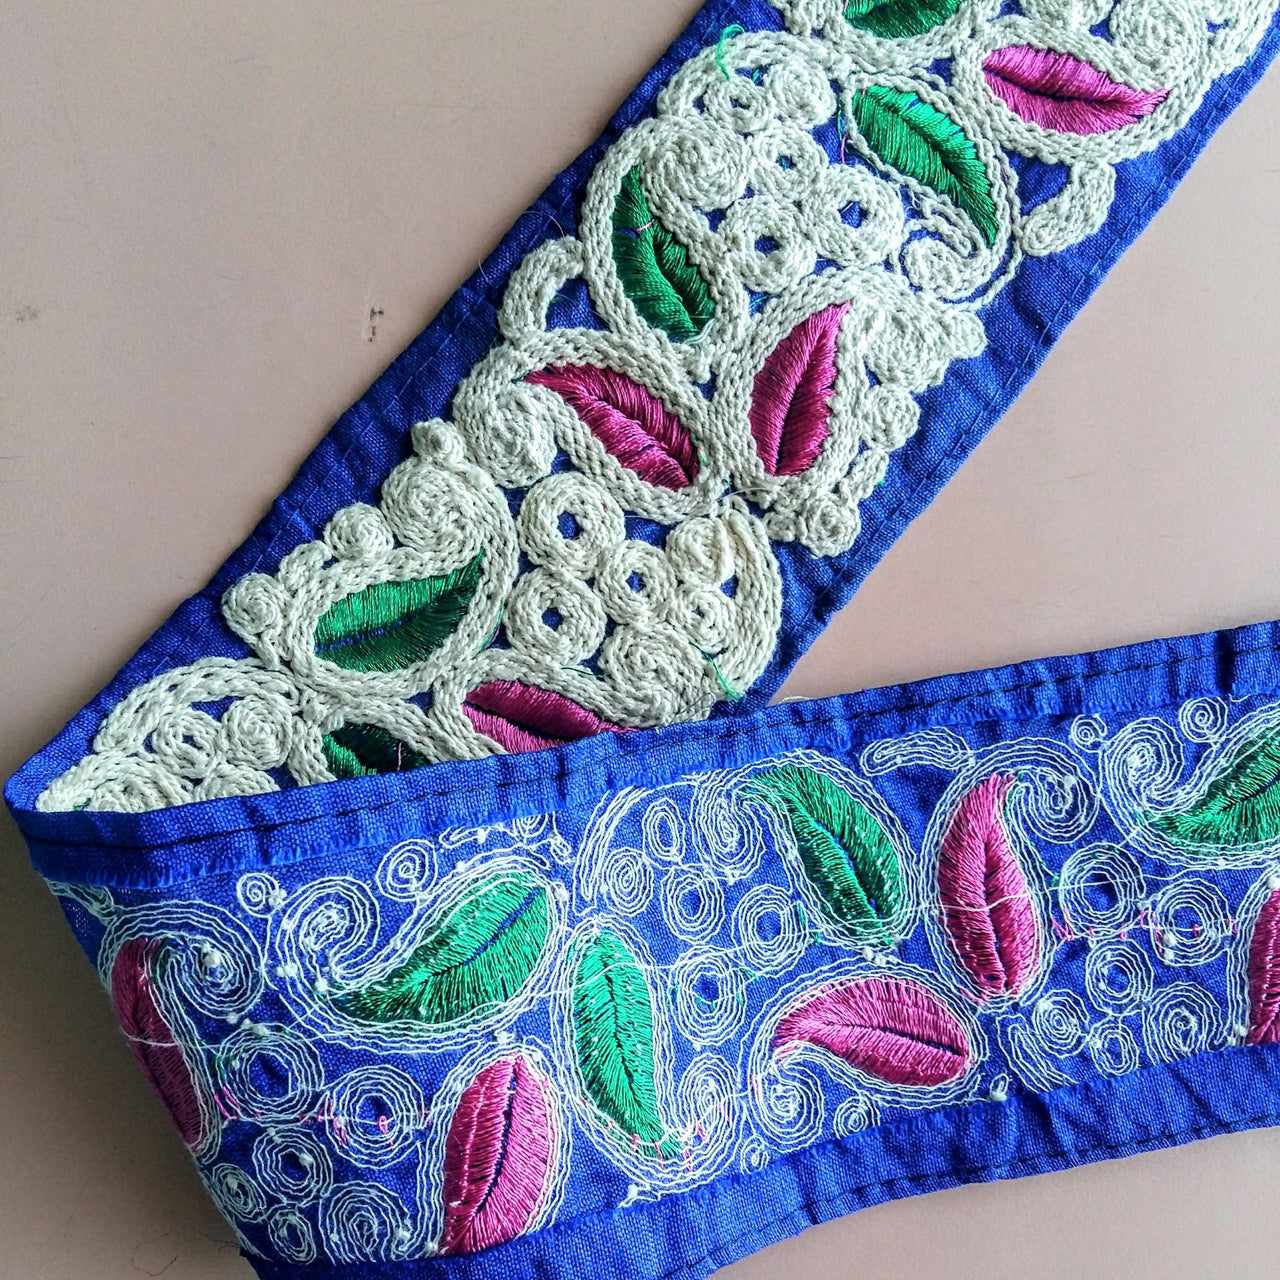 Green / Blue Fabric Trim With Off White, Pink And Green Embroidery, 75mm wide - 200317L520/21